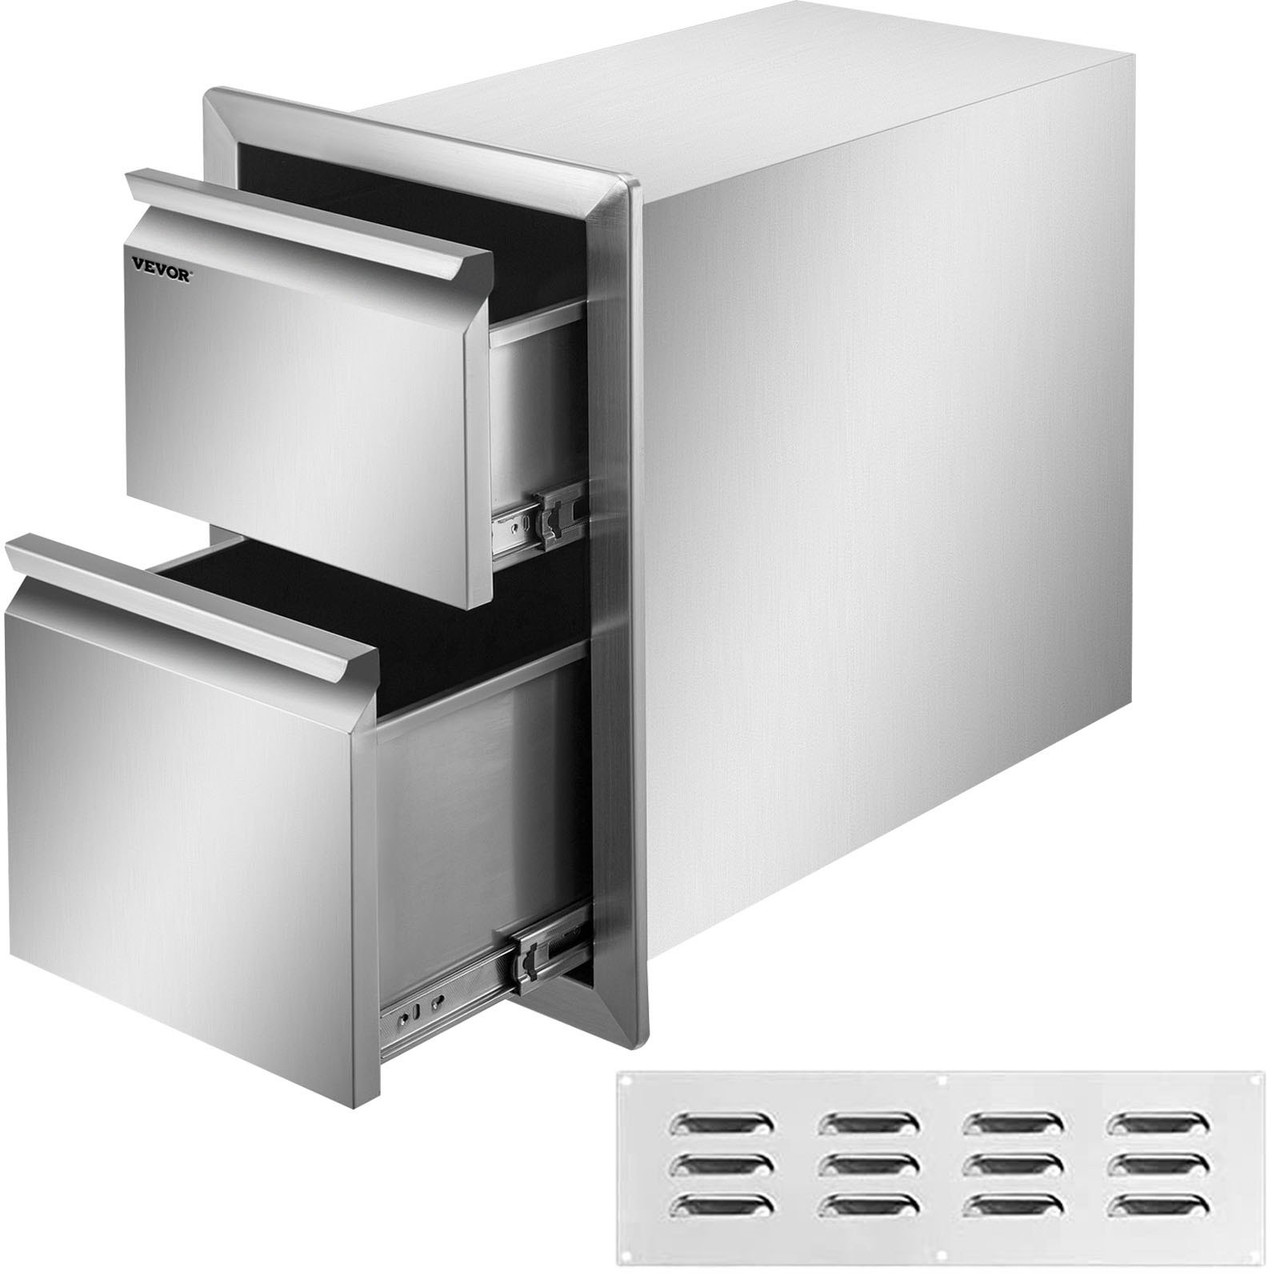 Outdoor Kitchen Drawers 13" W x 20.5" H x 21" D, Flush Mount Double BBQ Access Drawers Stainless Steel with Recessed Handle, BBQ Island Drawers for Outdoor Kitchens or Grill Station